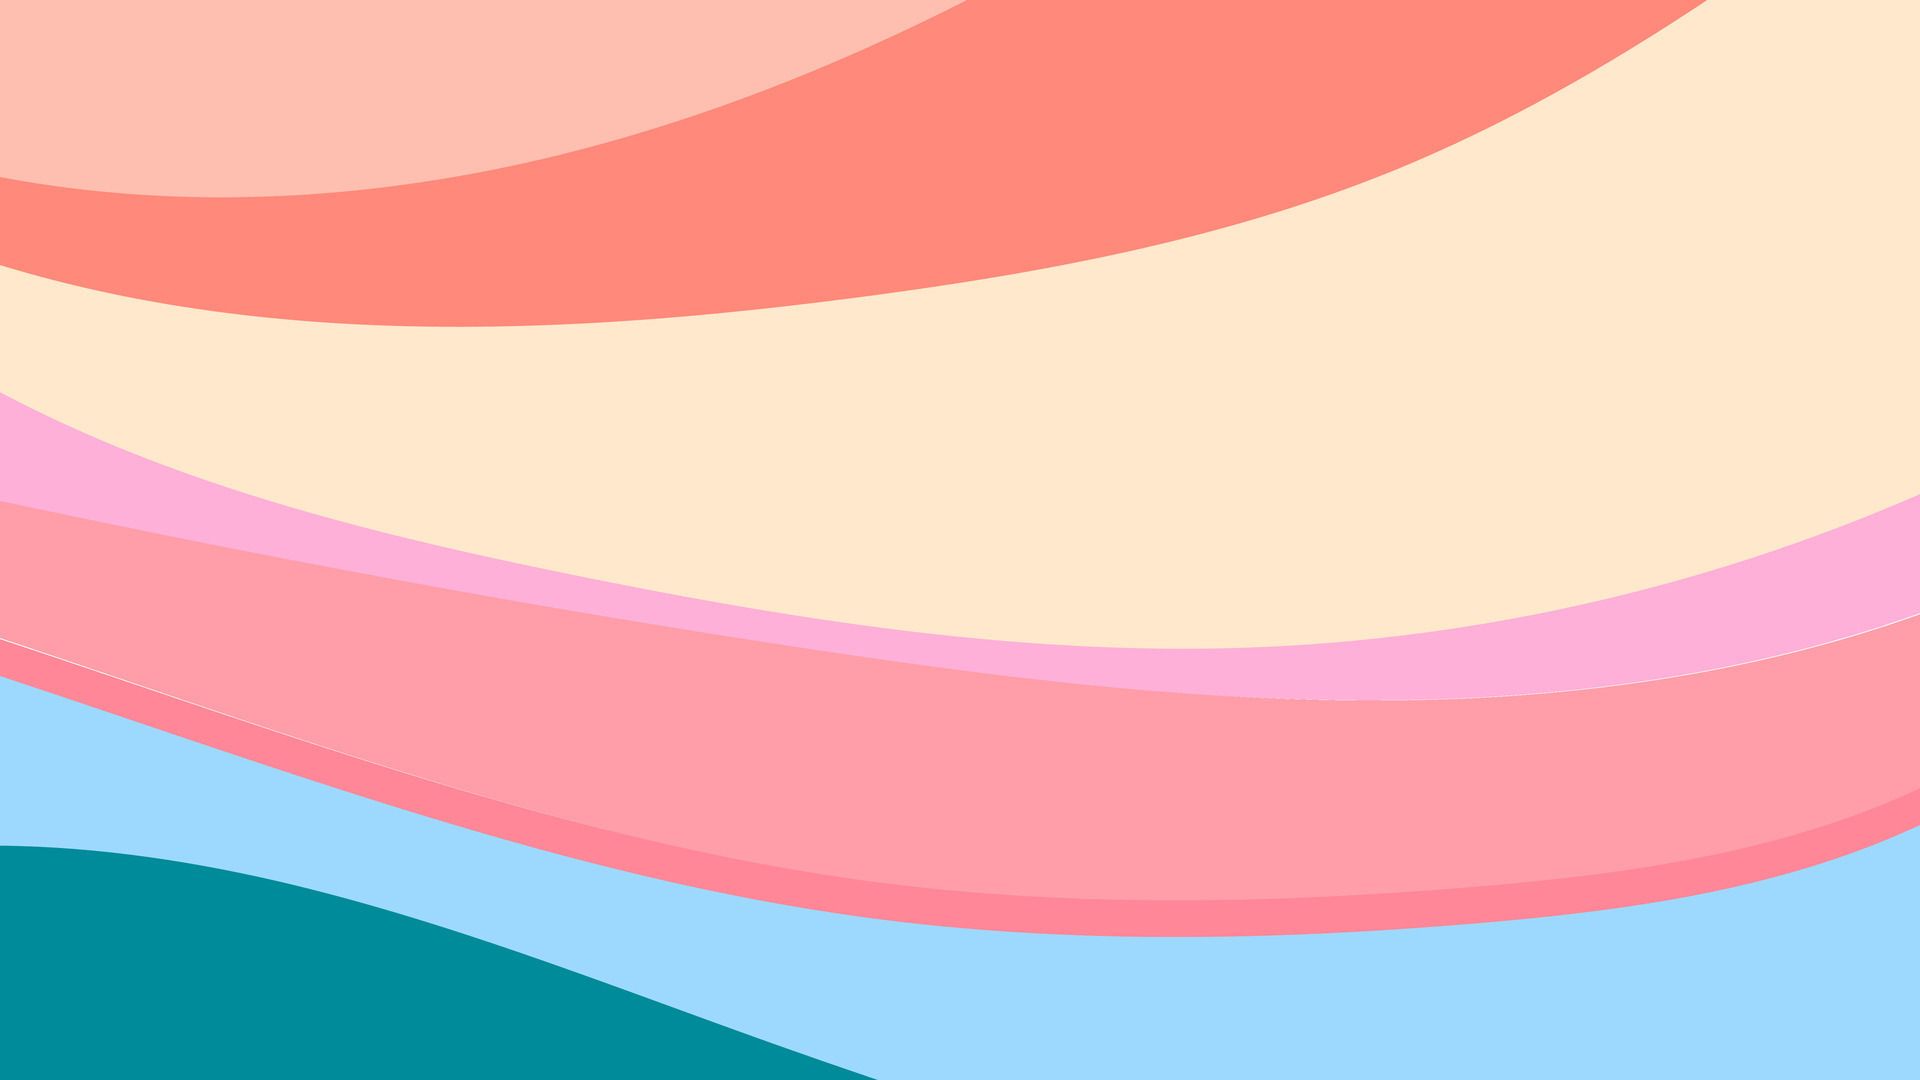 IPhone wallpaper with abstract pastel colors. - Geometry